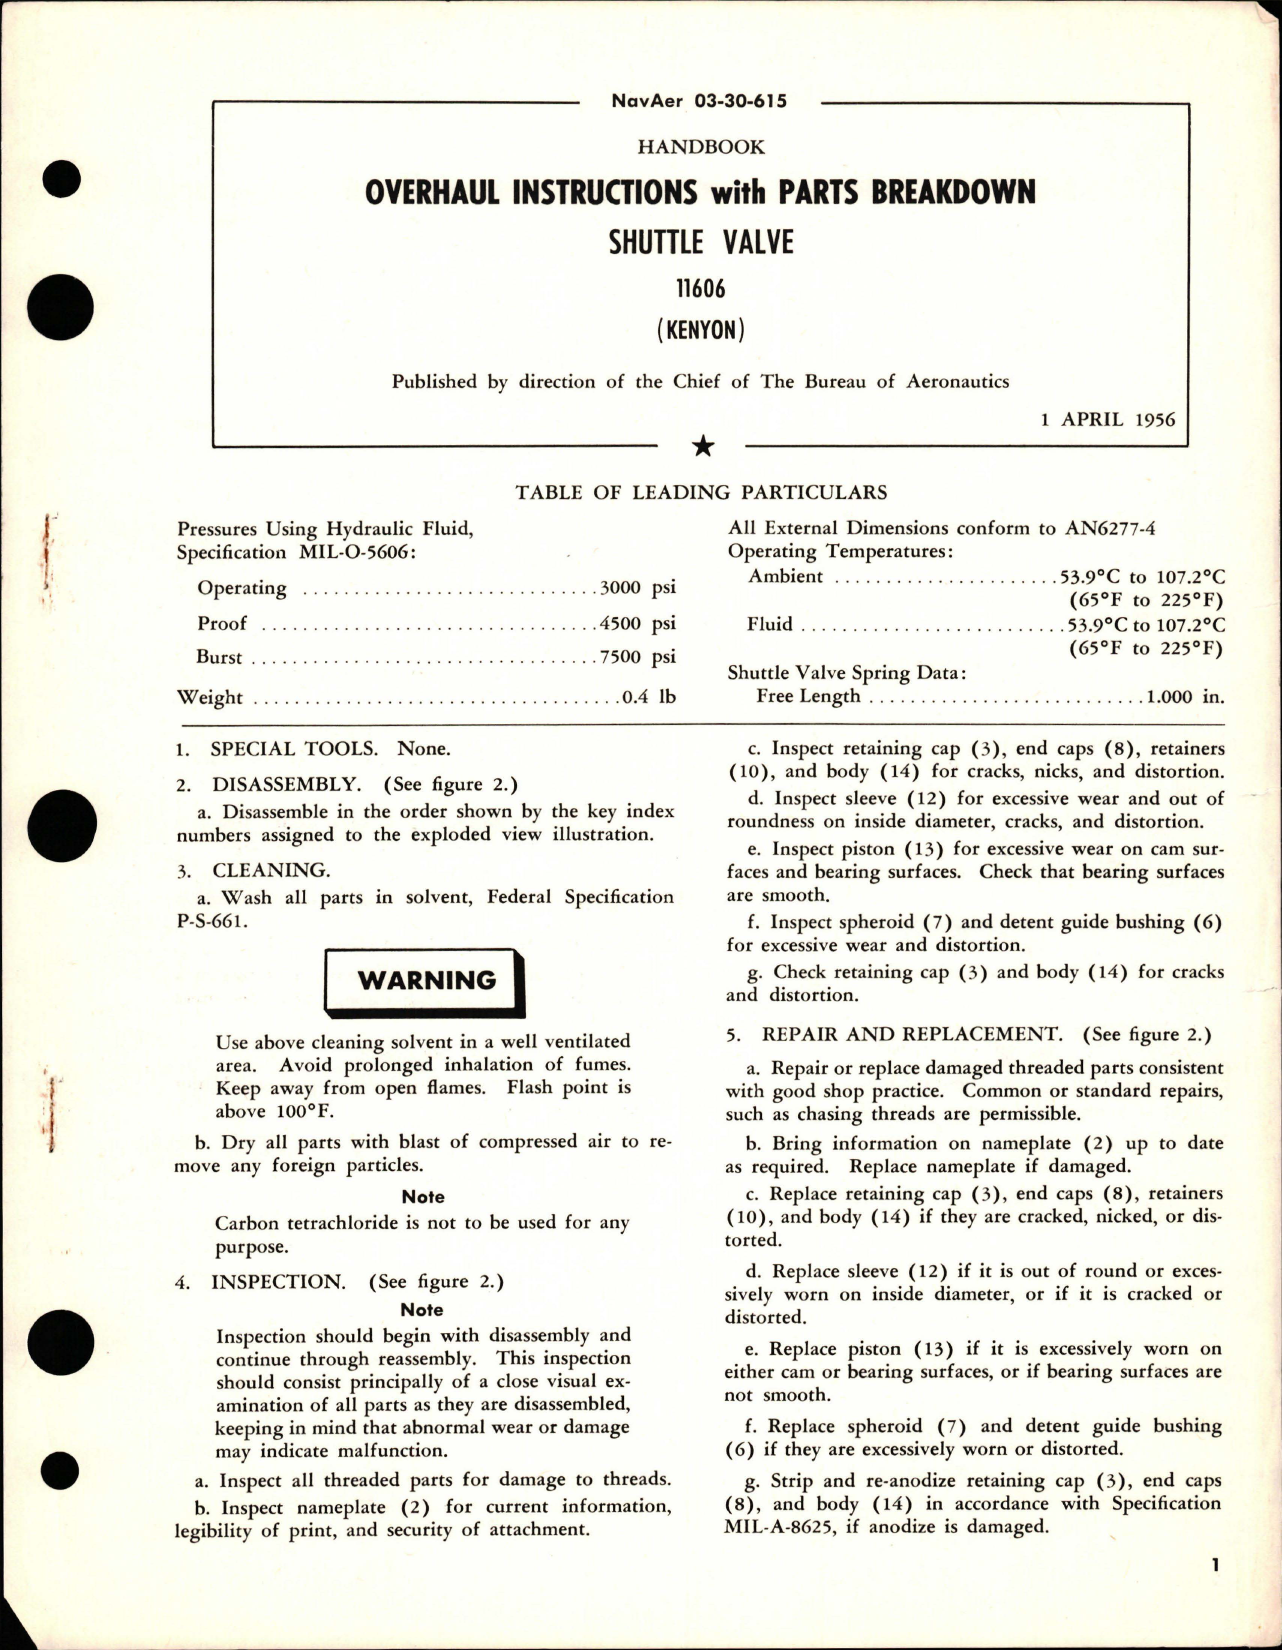 Sample page 1 from AirCorps Library document: Overhaul Instructions with Parts Breakdown for Shuttle Valve - 11606